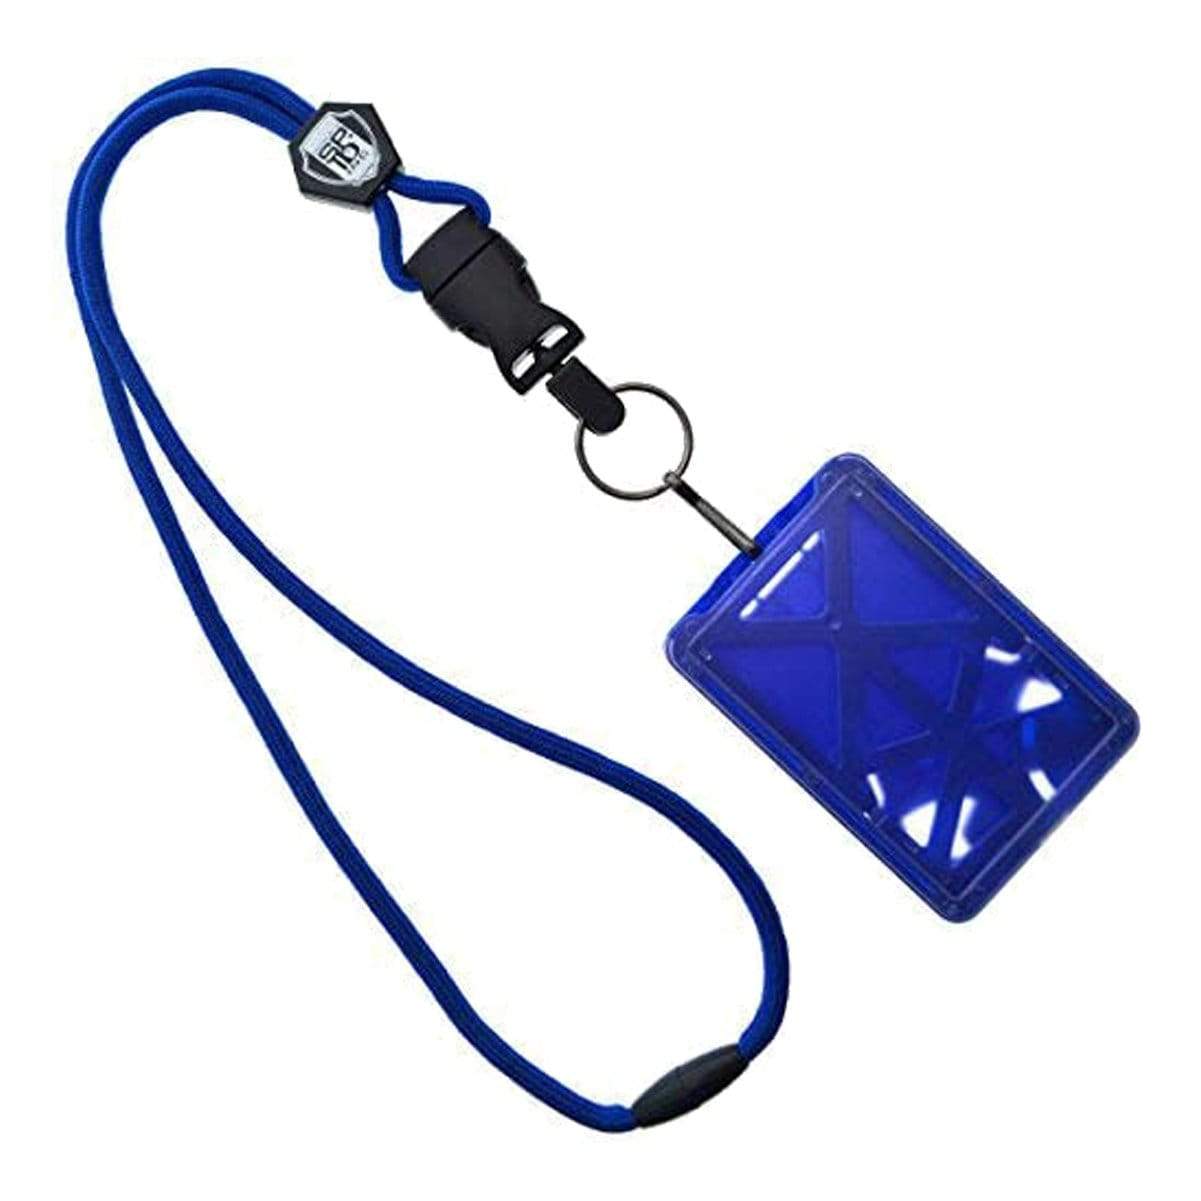 Top Loading THREE ID Card Badge Holder with Heavy Duty Lanyard w/ Detachable Metal Clip and Key Ring by Specialist ID